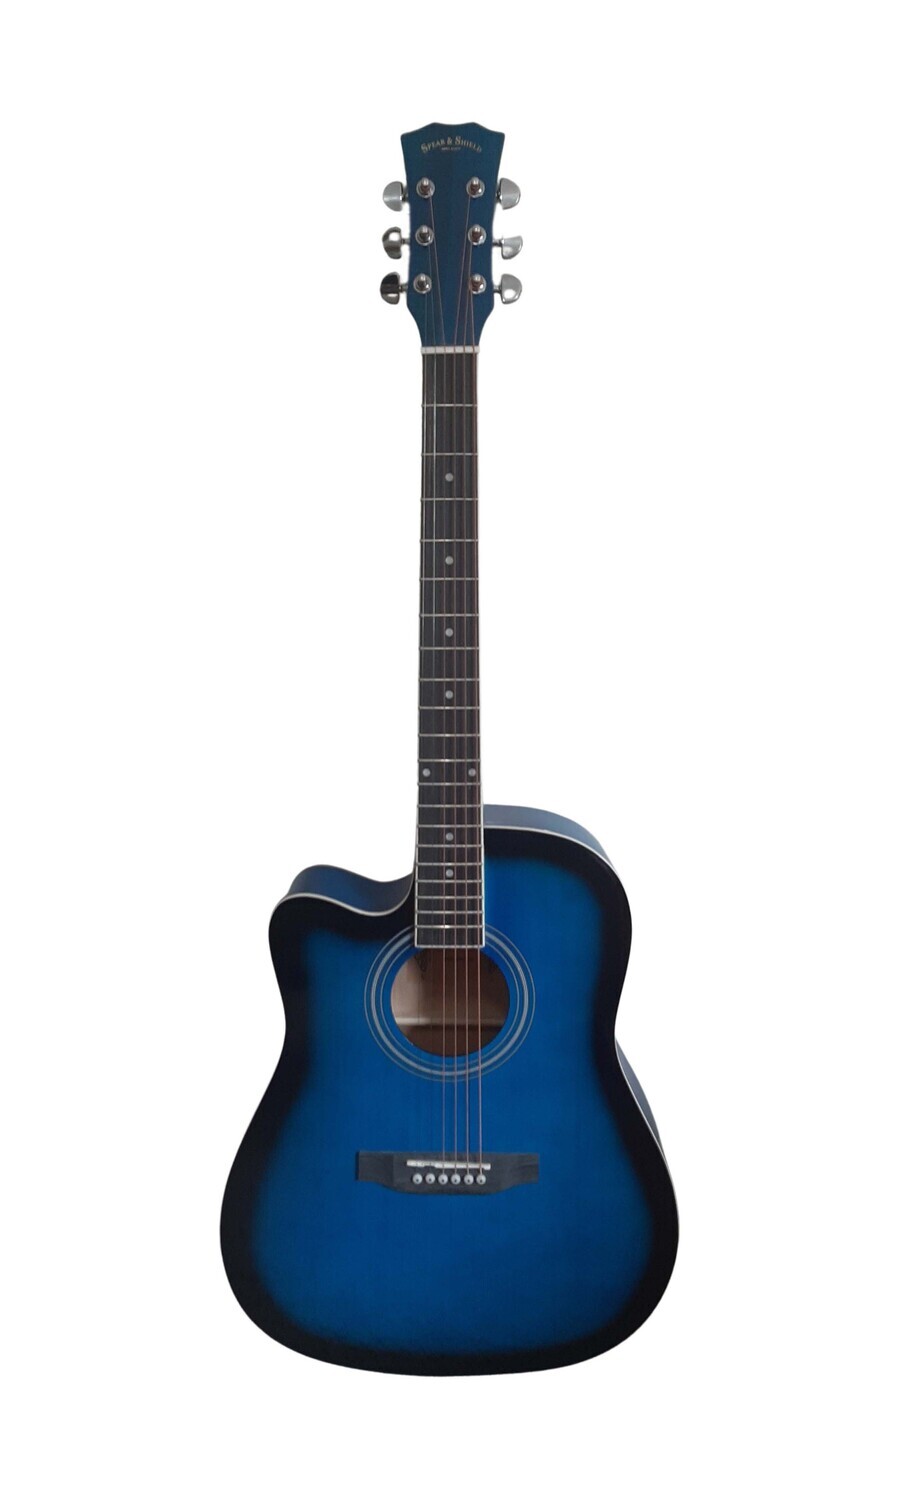 Carefully Crafted to Give Children A with Strings and Picks Beginner Guitar signmeili 21-inch Blue Folk Acoustic Guitar 